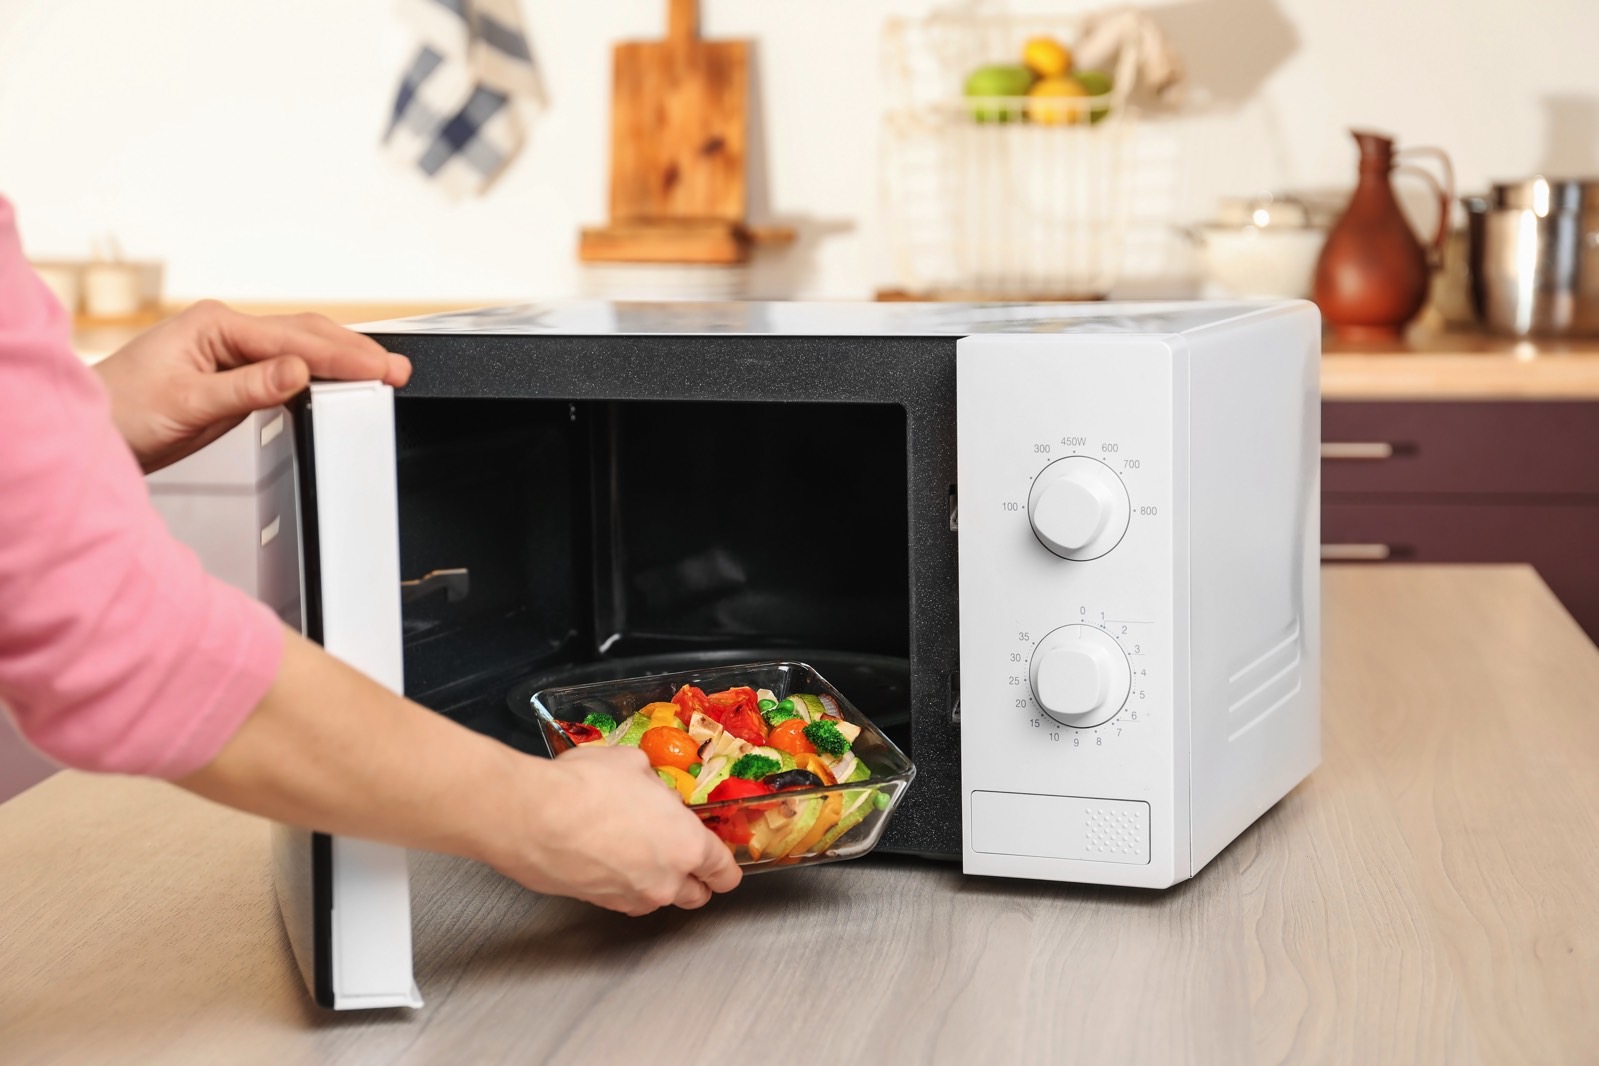 Recall alert: This popular microwave-safe product can catch fire, so stop using it now